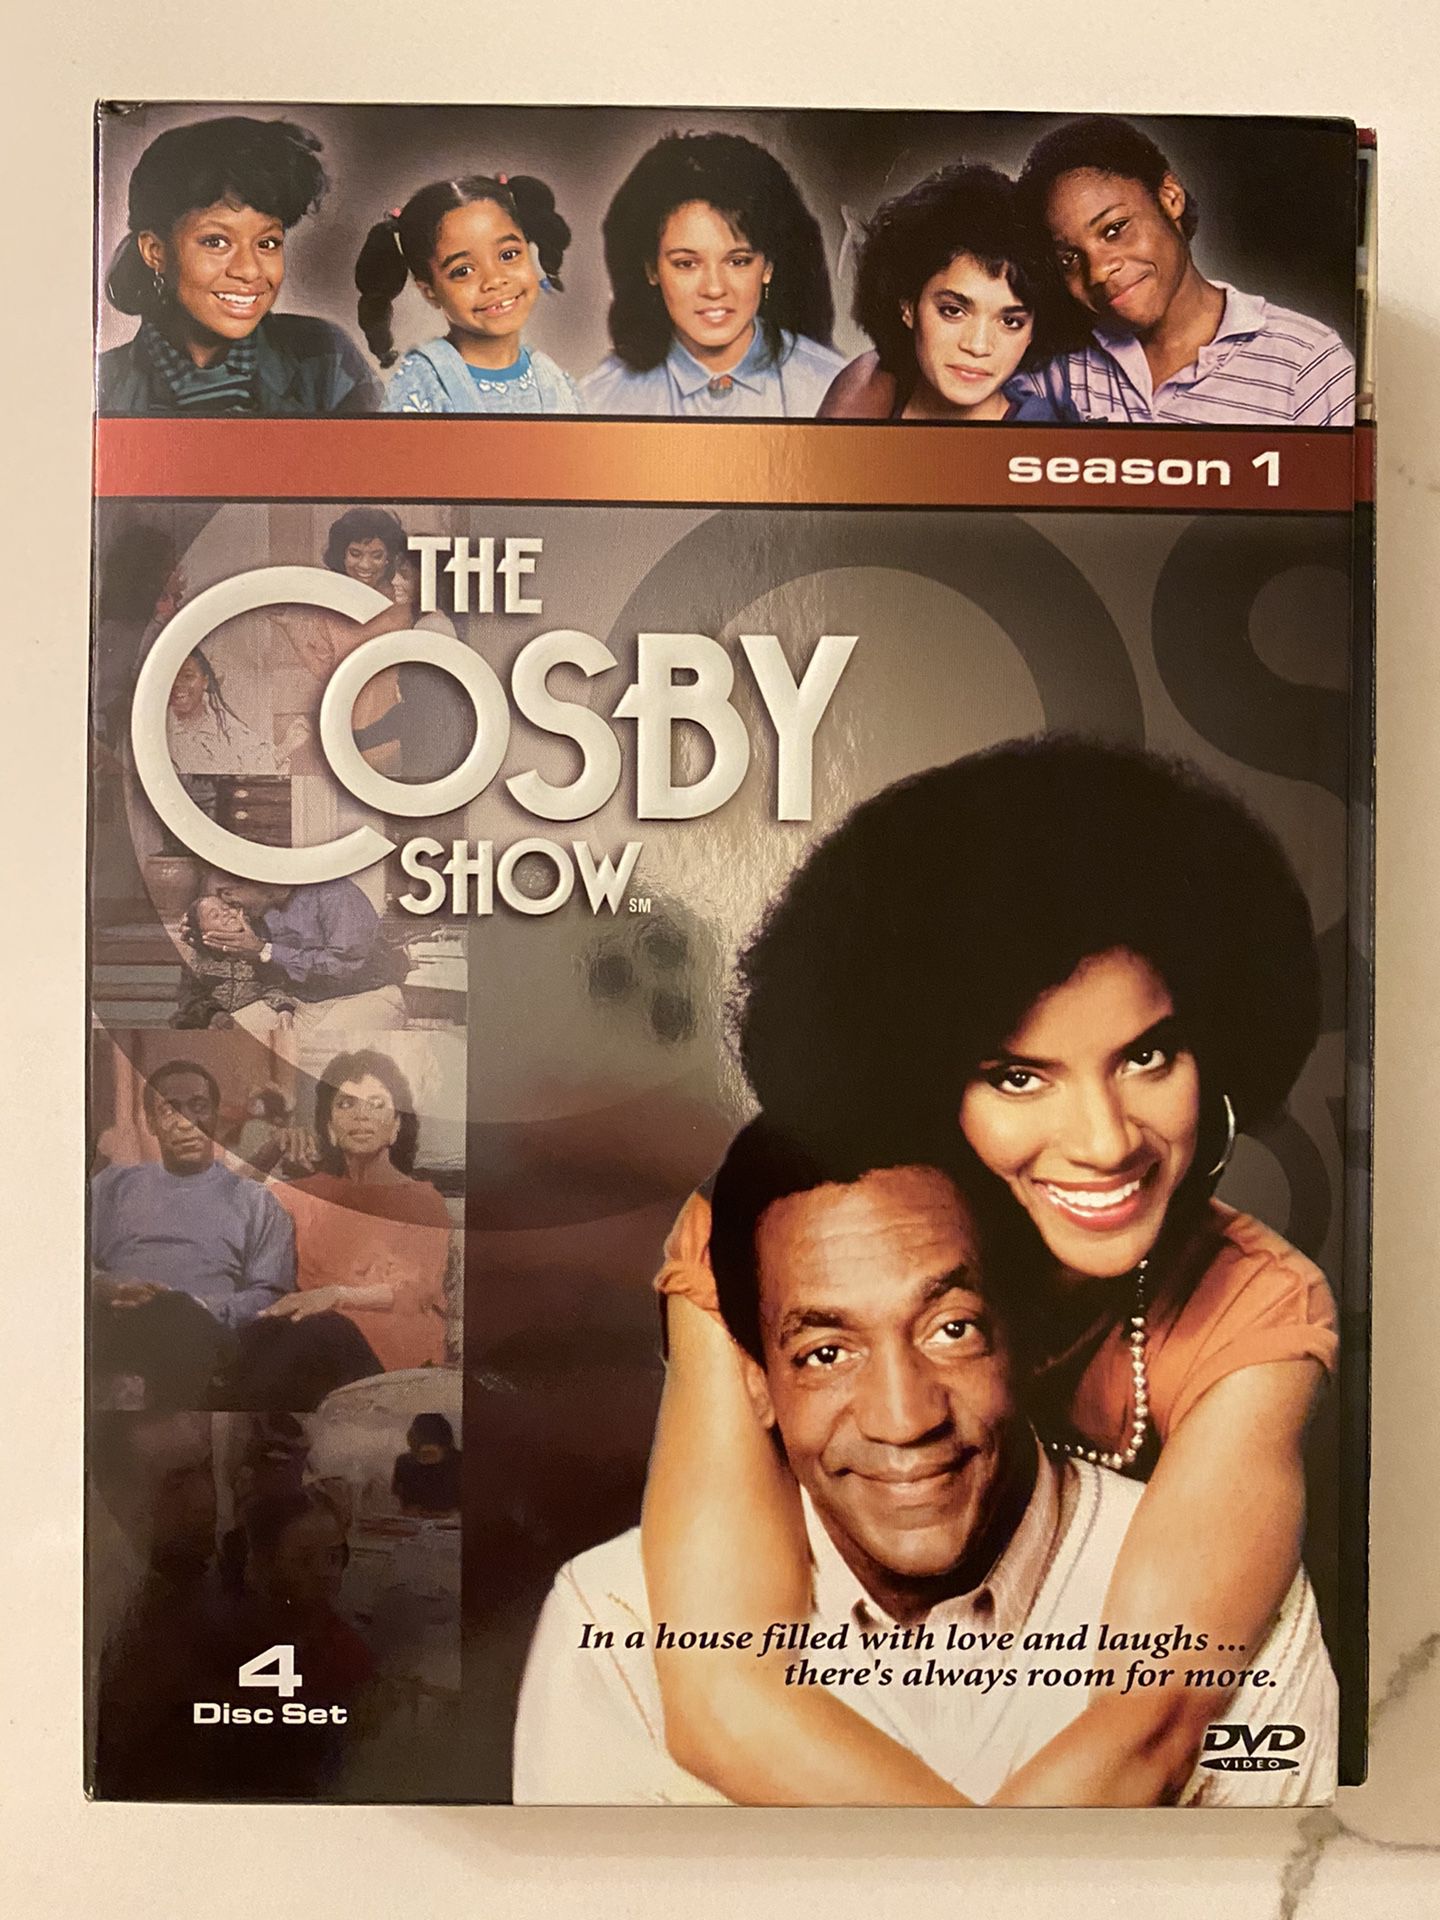 Complete Series Of The Cosby Show! 8 Seasons!